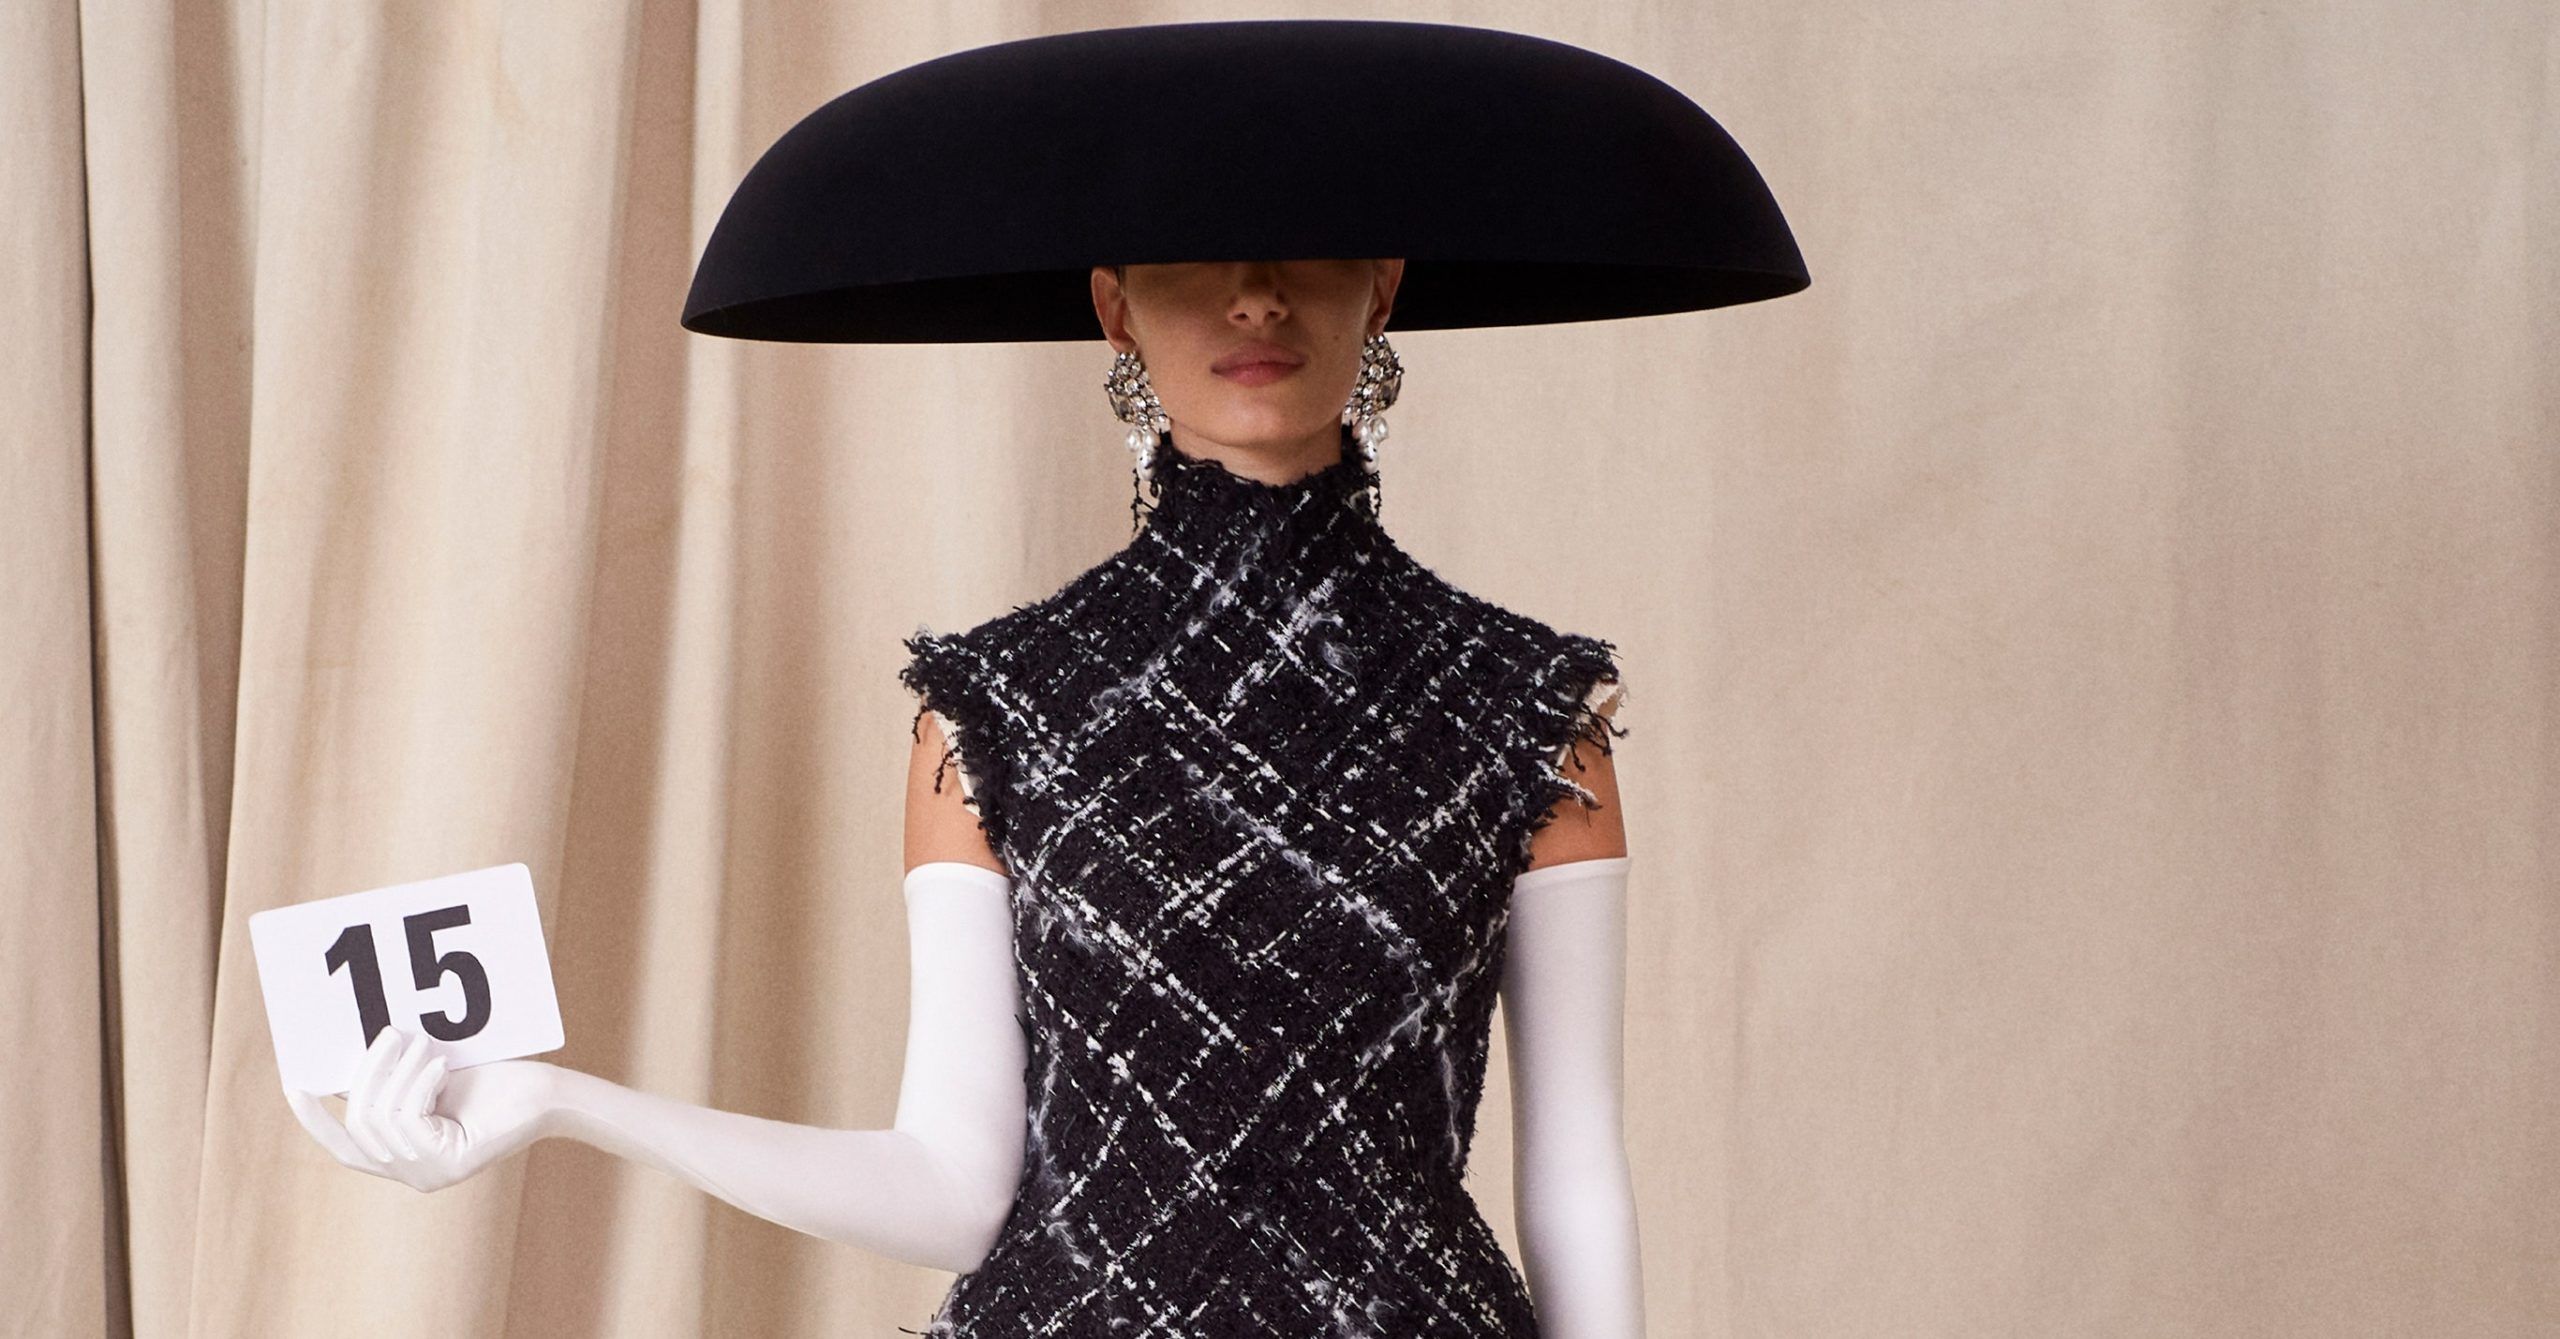 The New Look Of Couture According To Balenciaga